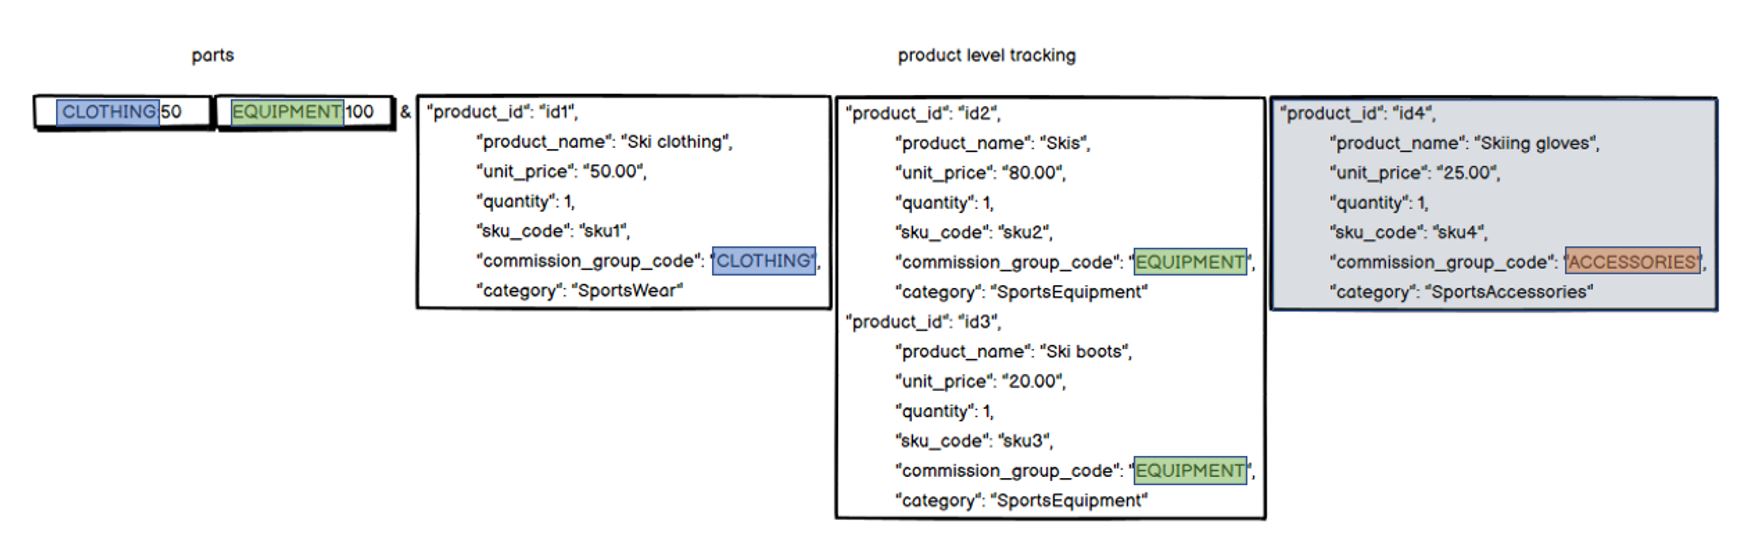 File:Product_mapping.JPG